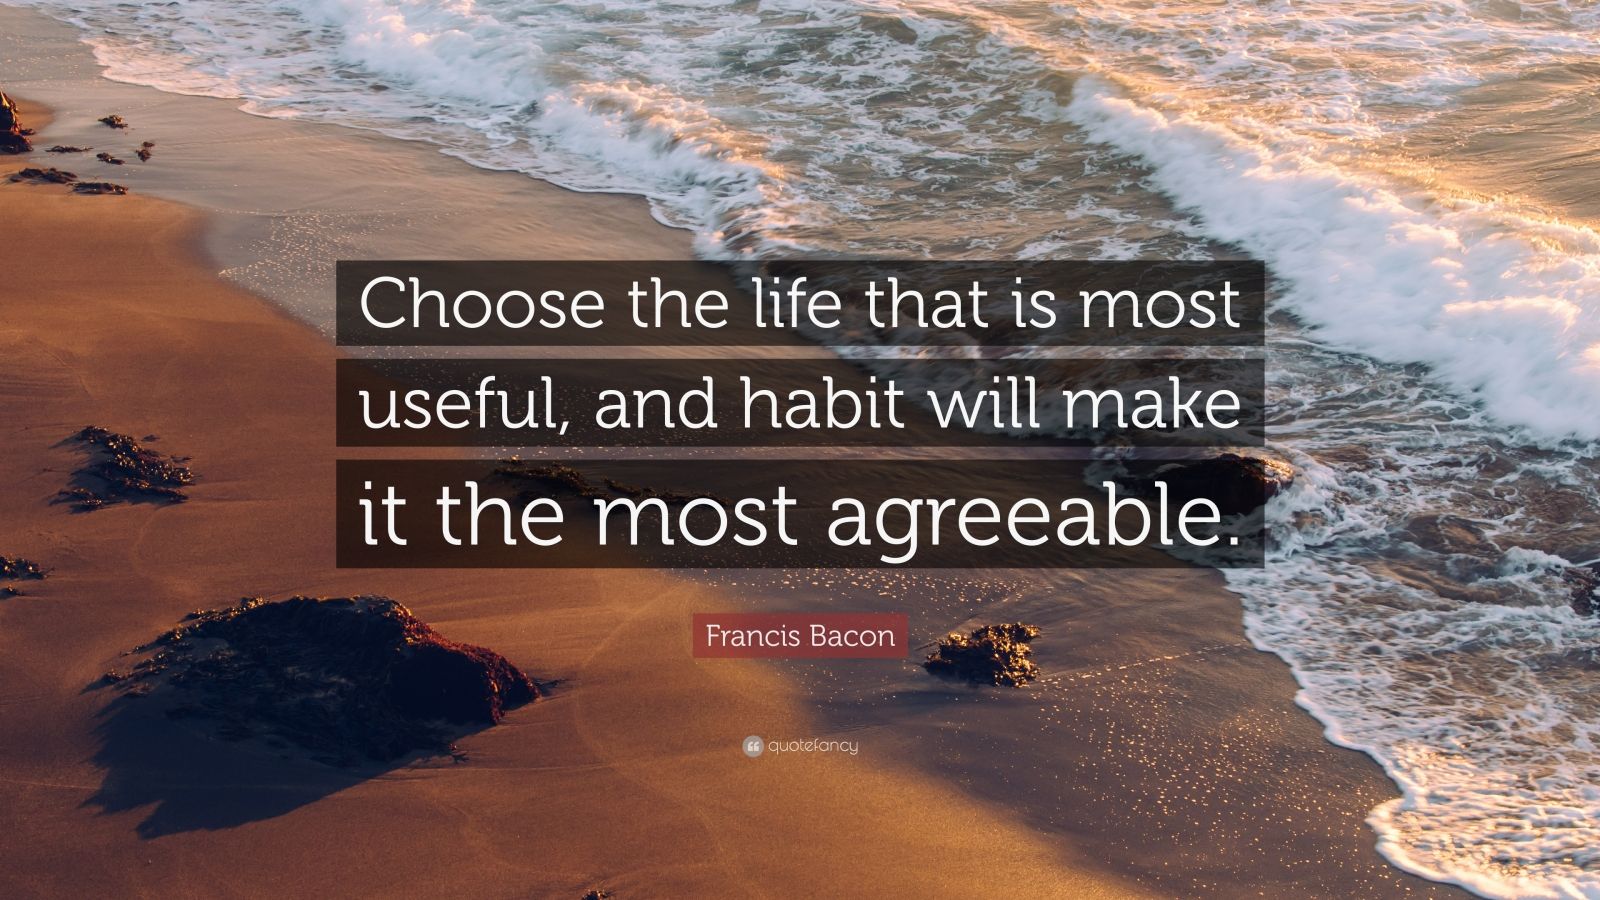 Francis Bacon Quote: “Choose the life that is most useful, and habit ...